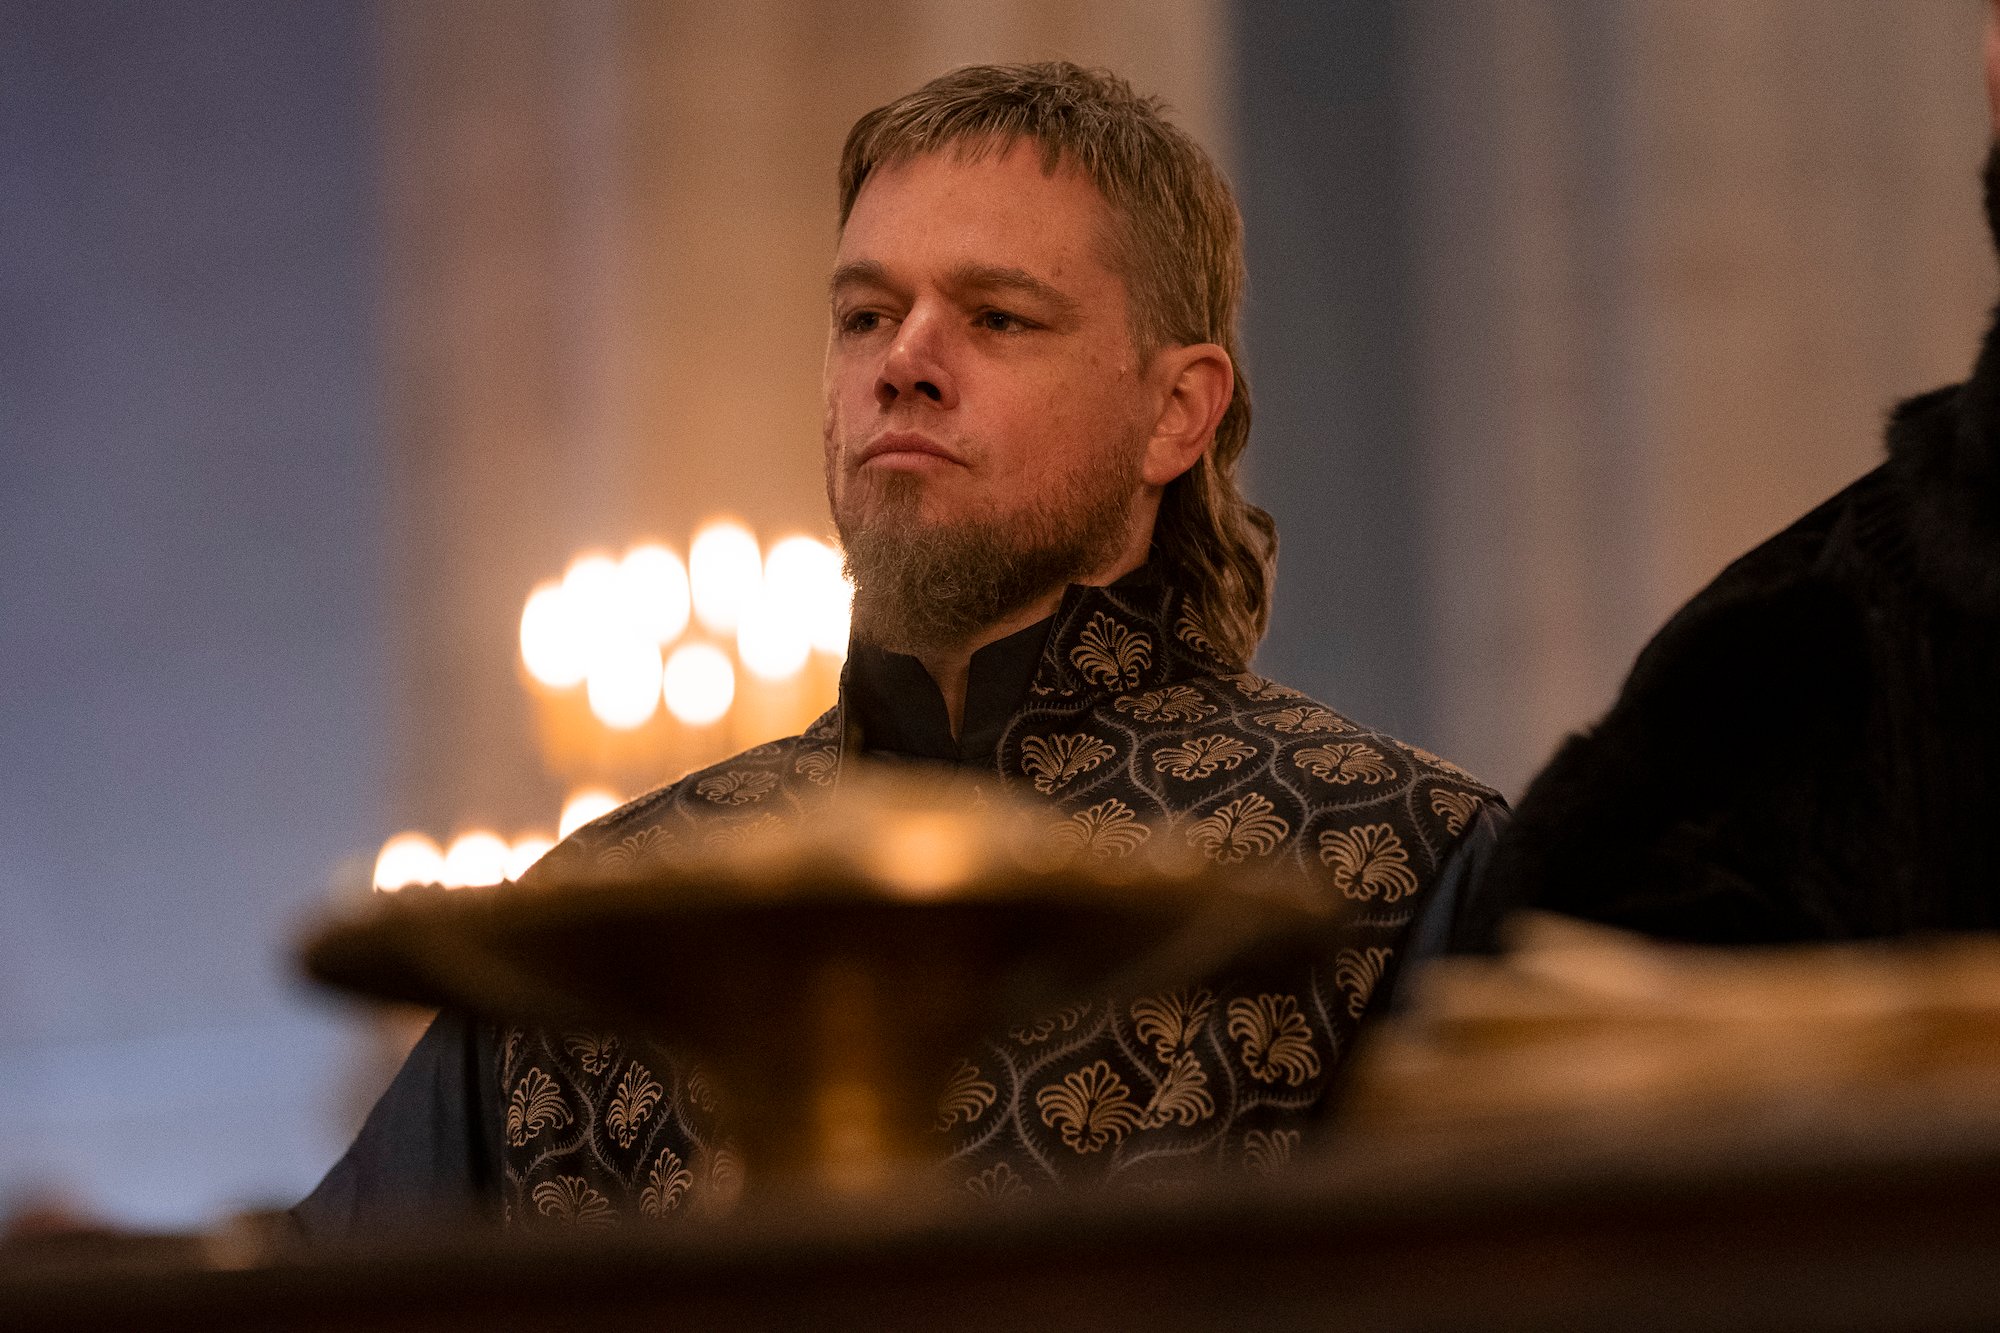 'The Last Duel' star Matt Damon sits in a candlelit chamber